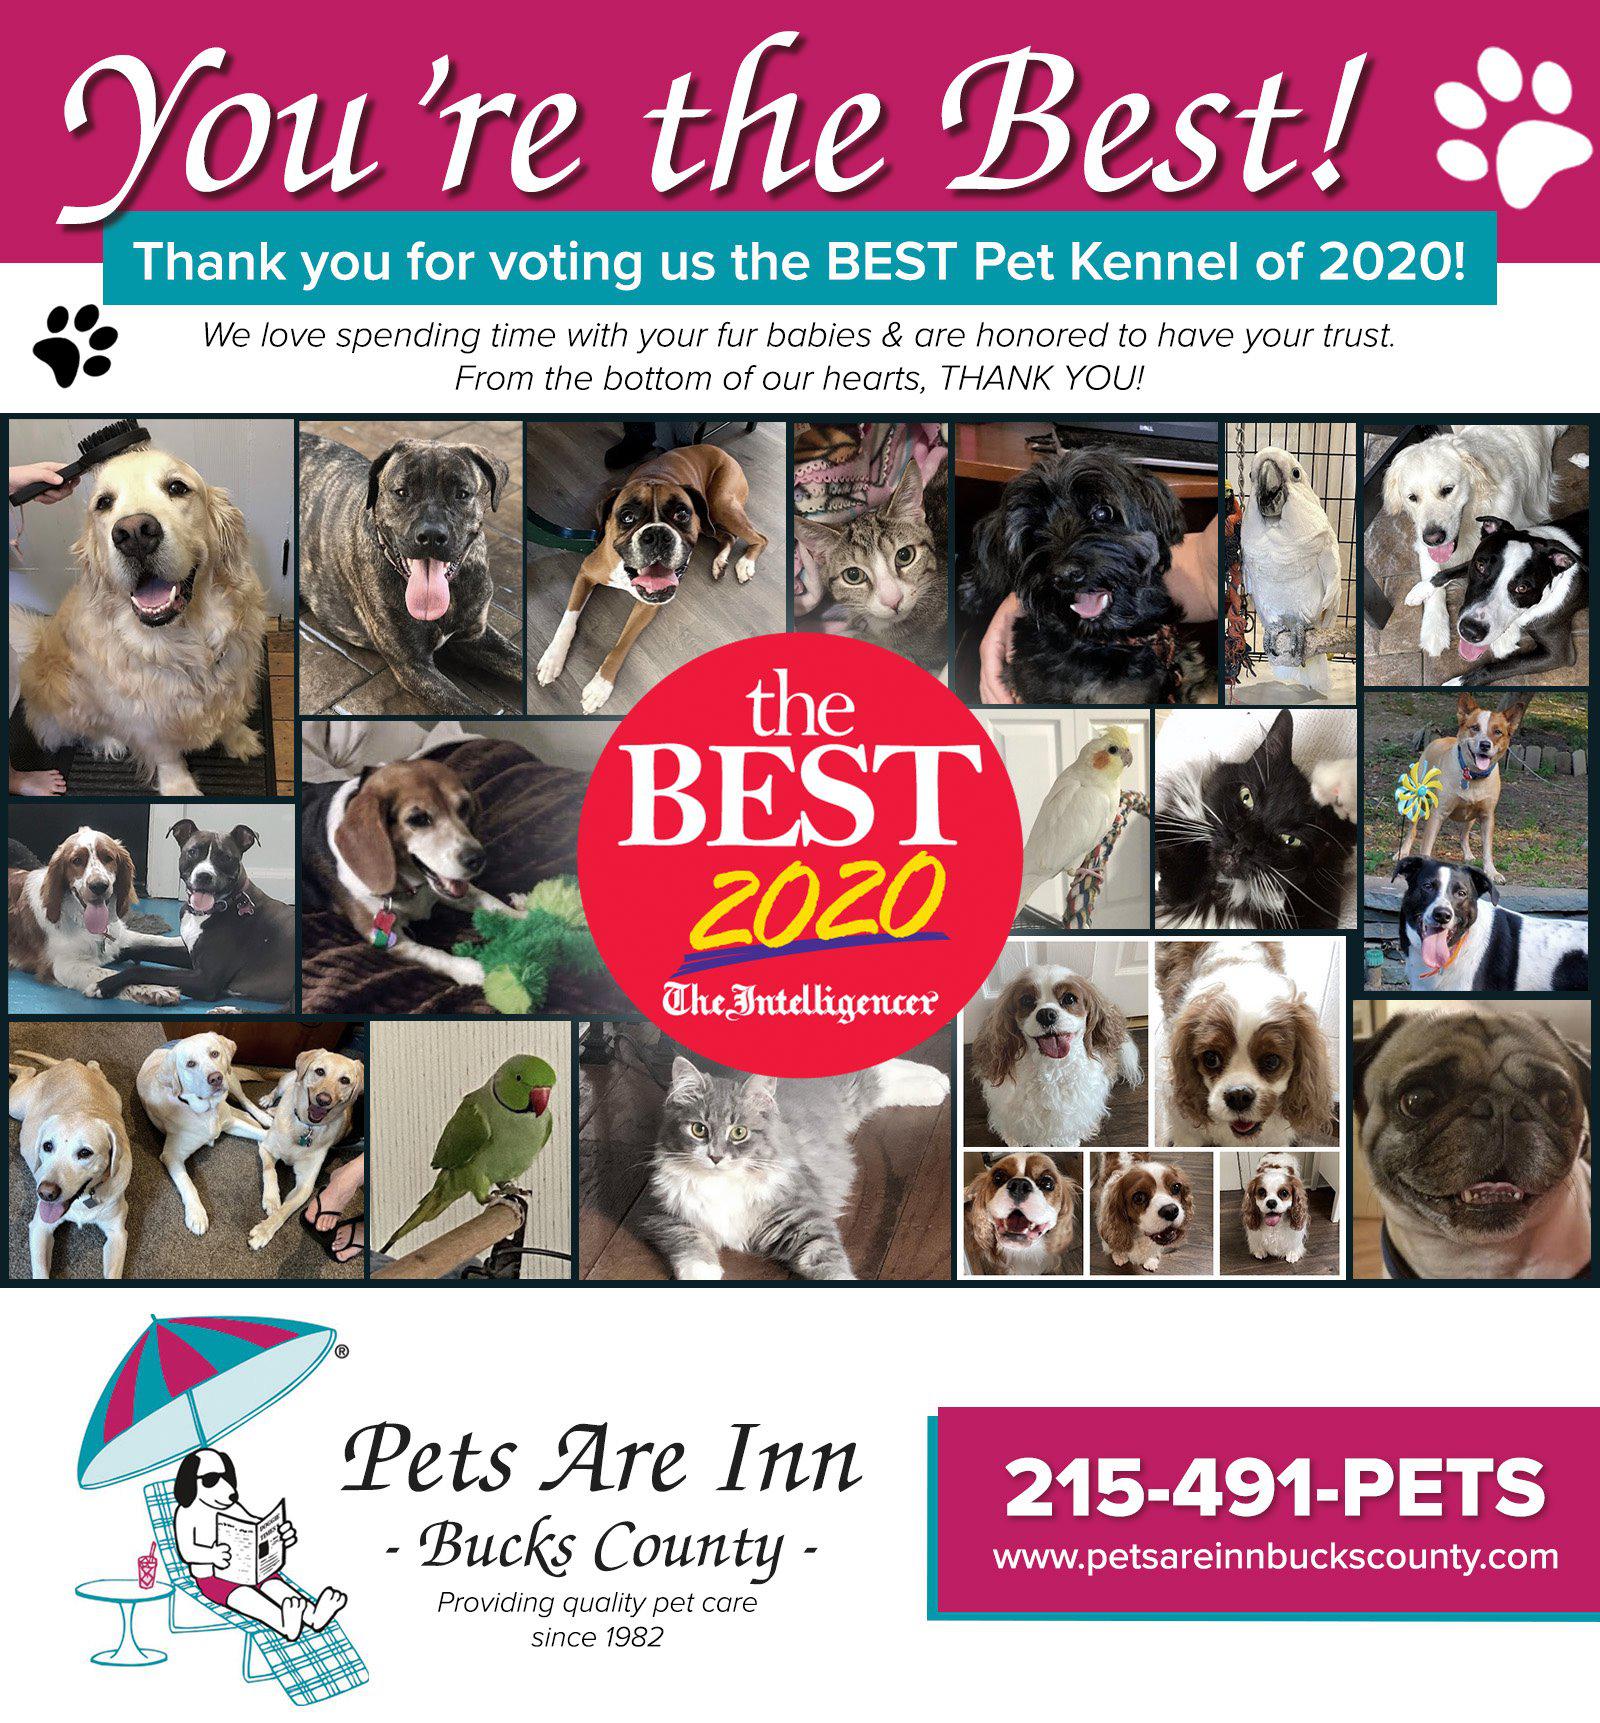 At Pets Are Inn, we are honored that you all have voted us a 2020 Best Pet Kennel. It is our great pleasure to work alongside our amazing host families to provide quality pet boarding services to all of your fur babies. We absolutely love doing what we do. Thank you all for being part of our fur family!  PetsAreInn  Dogboarding  DoylestownPA